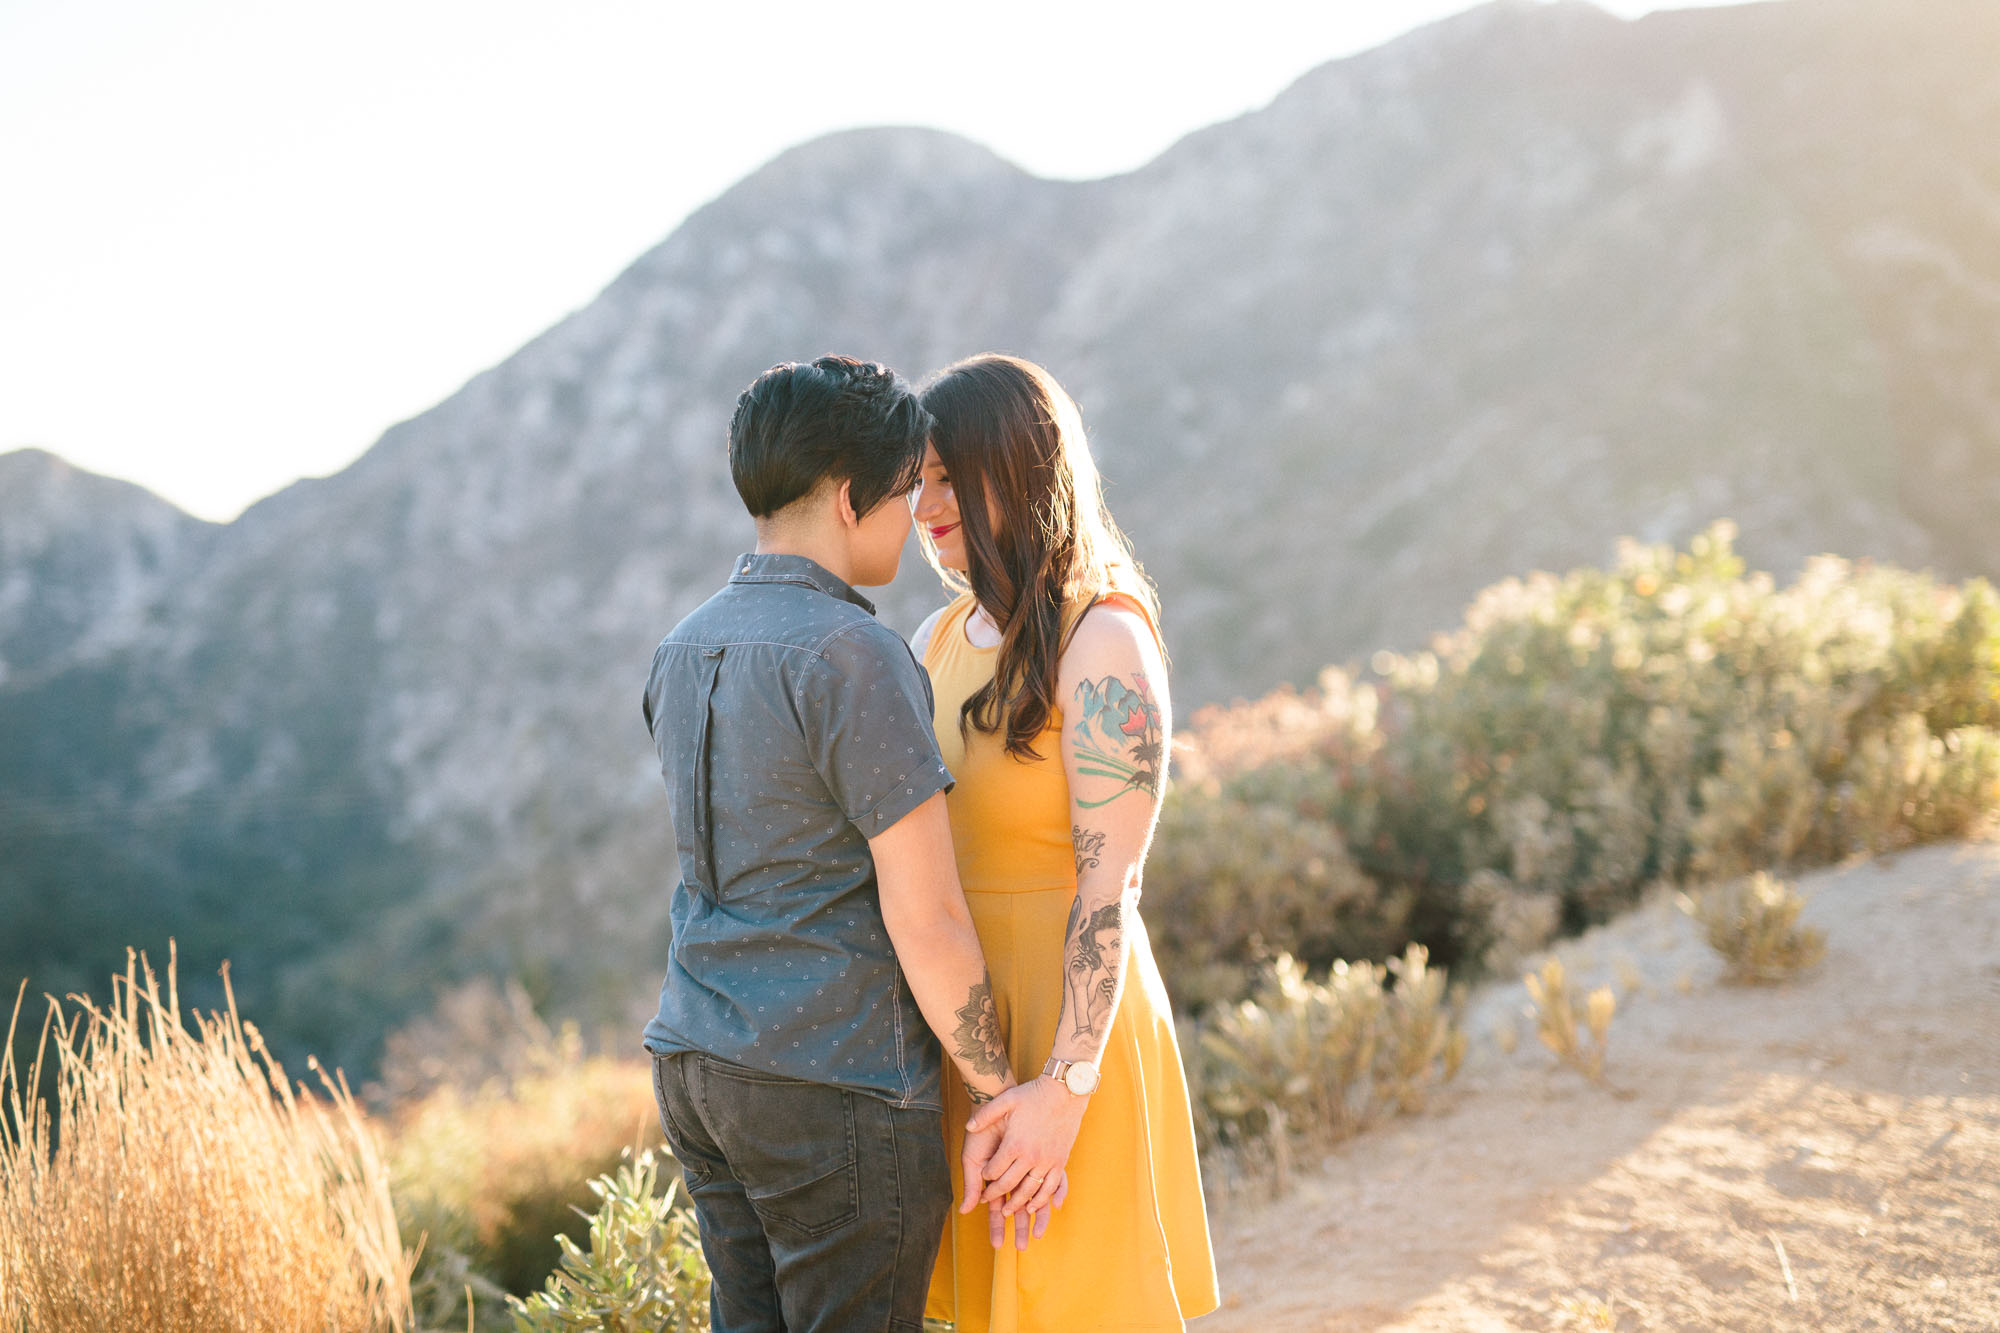 www-marycostaphotography-com-angeles-national-forest-engagement-0024